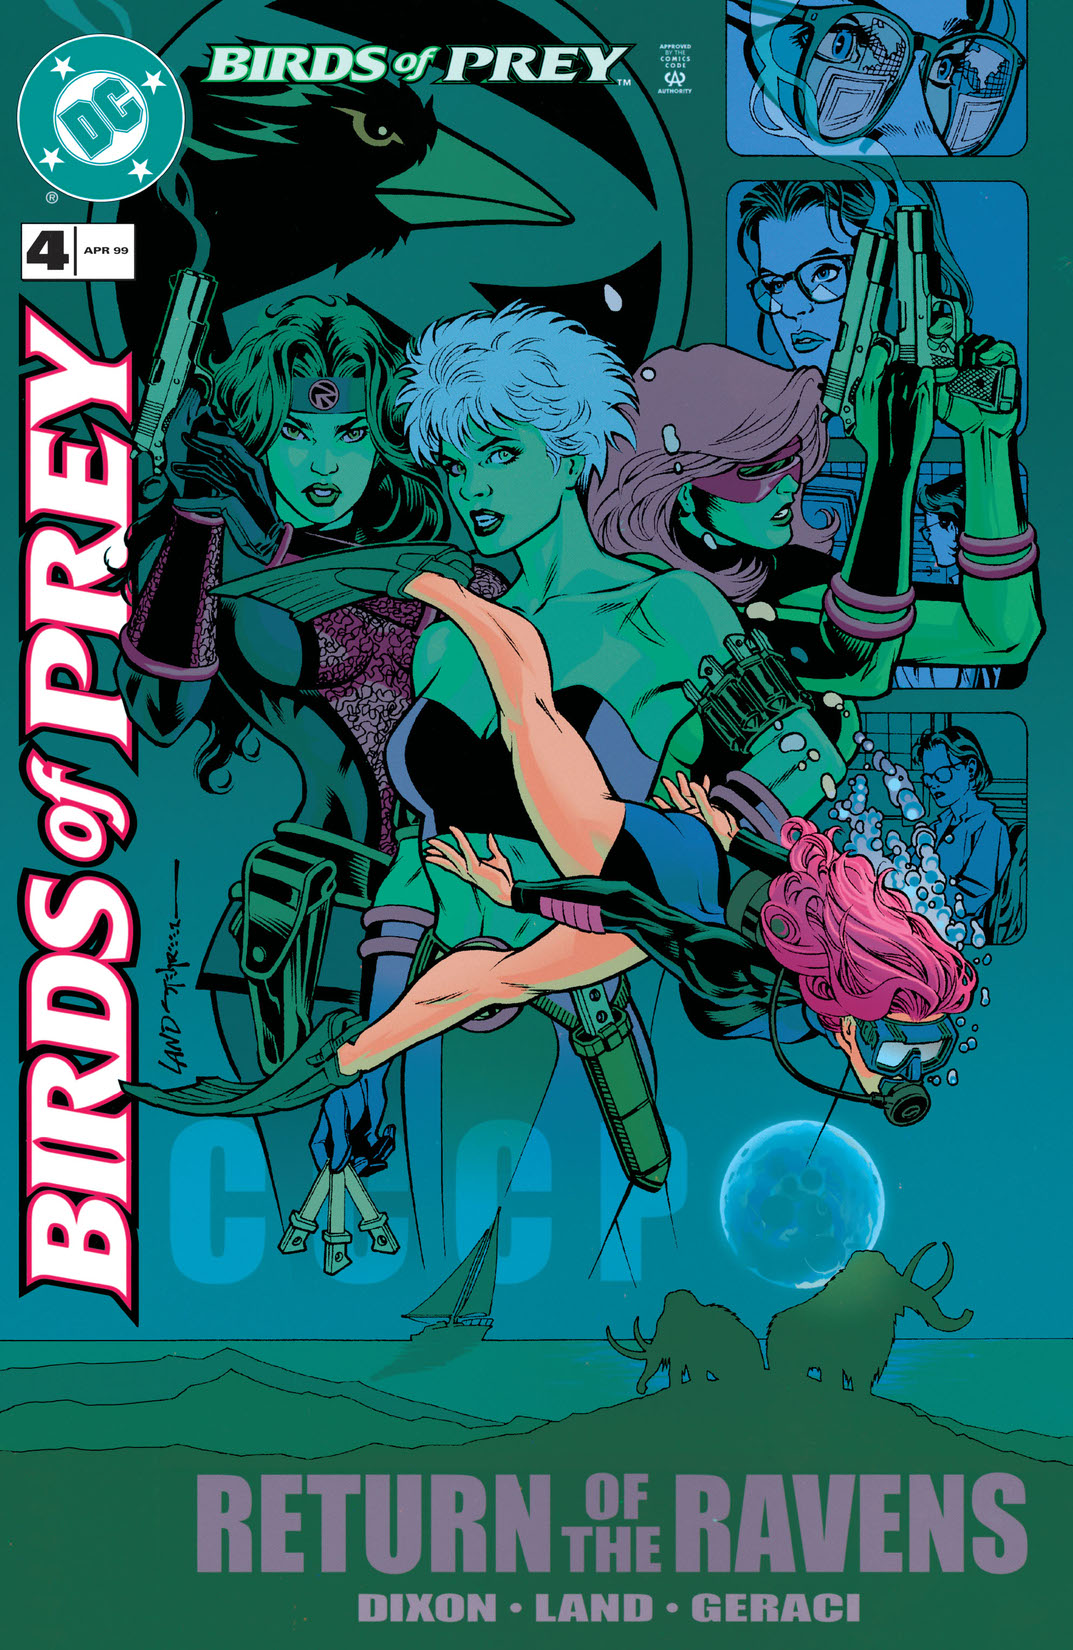 Birds of Prey (1998-) #4 preview images